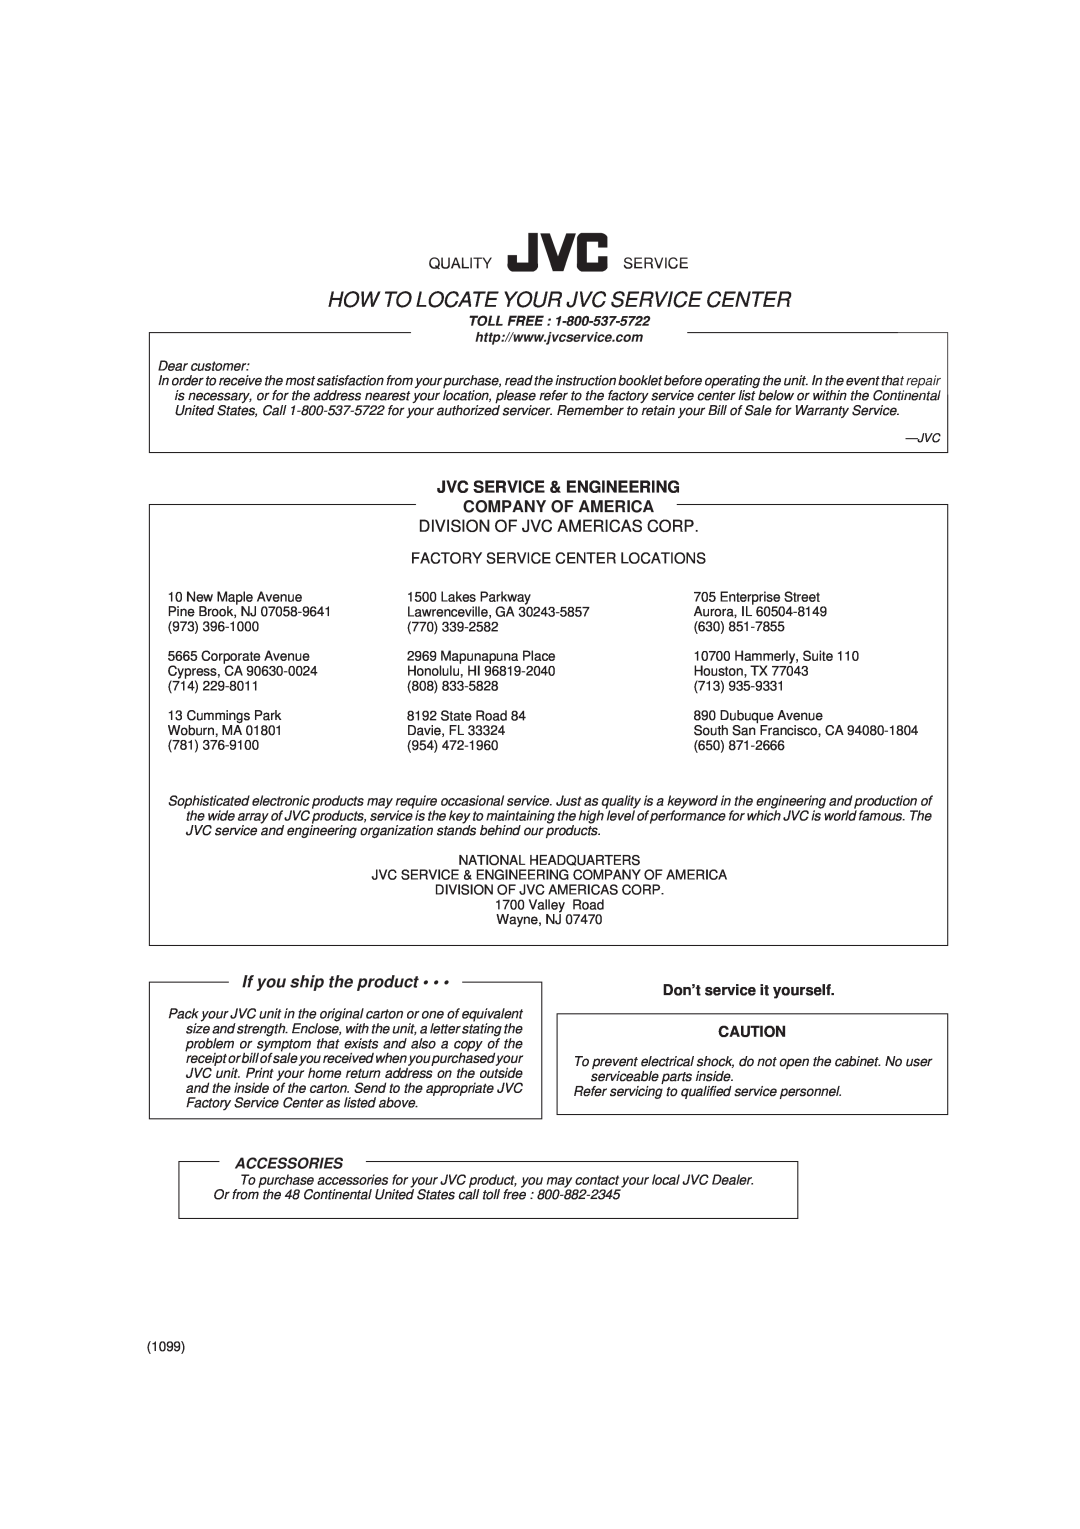 JVC RX-6000VBK Division Of Jvc Americas Corp, How To Locate Your Jvc Service Center, If you ship the product, Accessories 